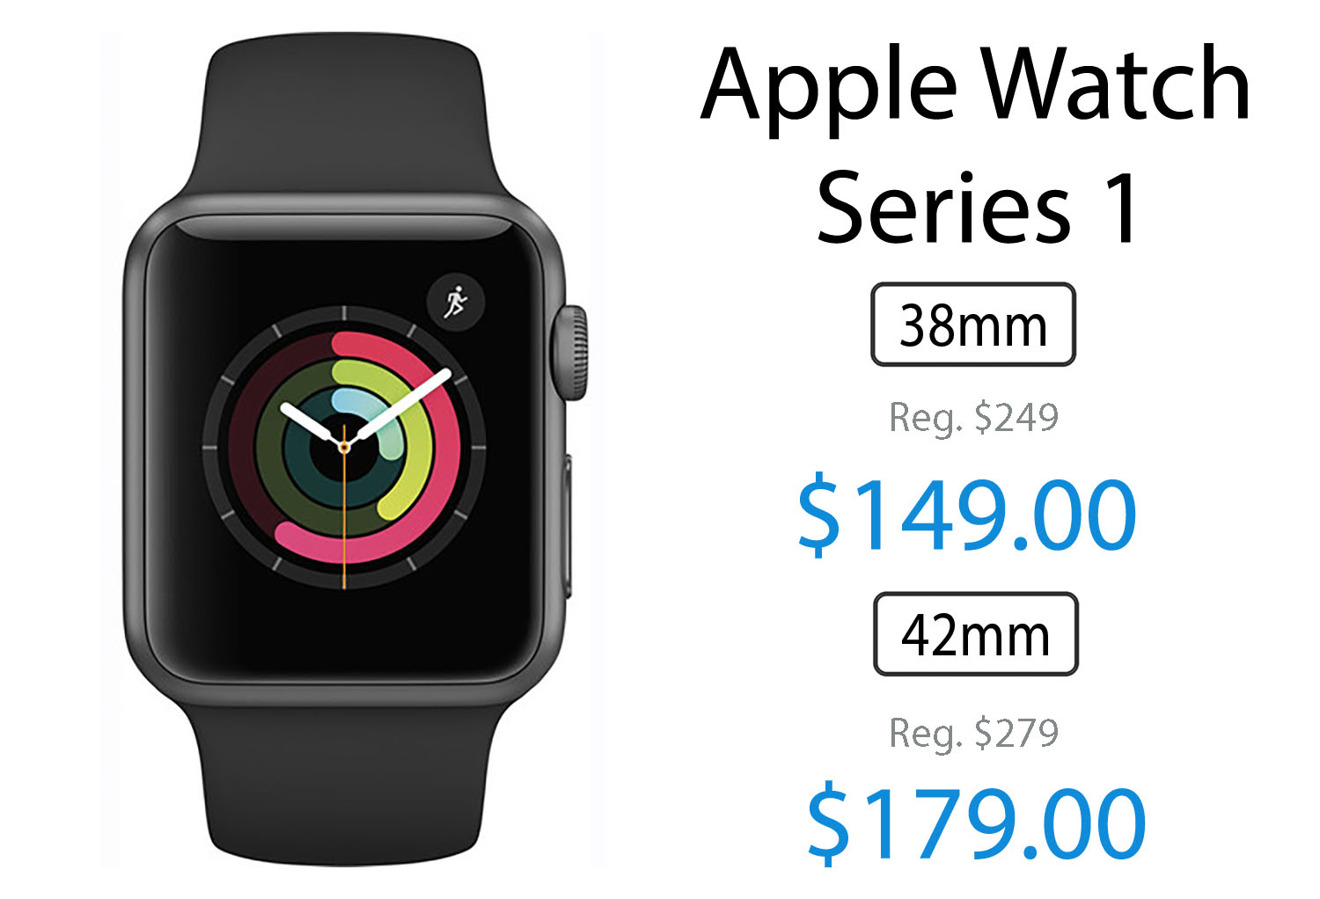 Apple Watch Series 1 discounted